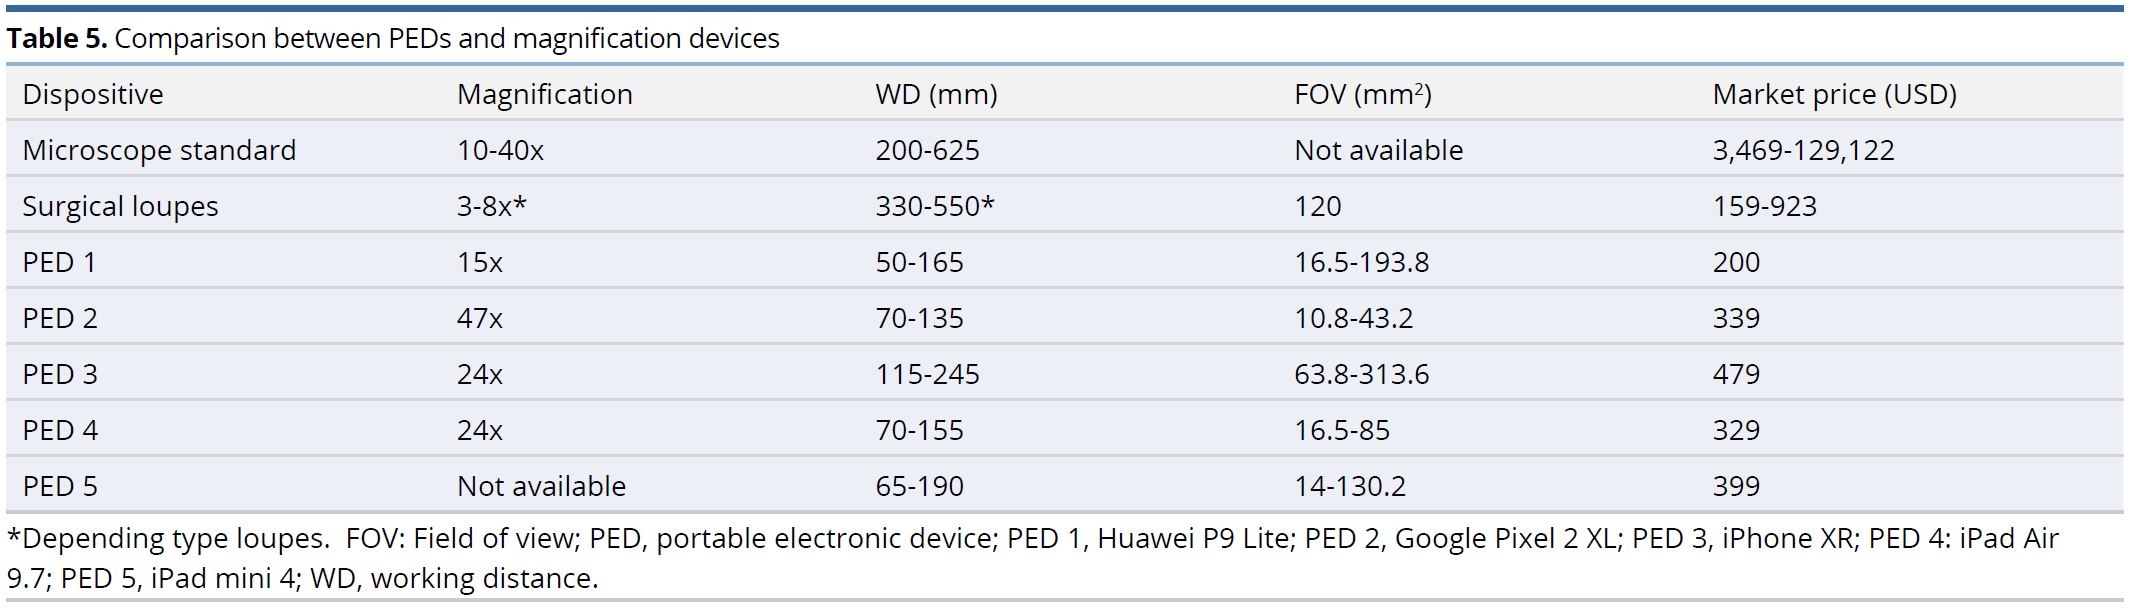 Table 5.JPGComparison between PEDs and magnification devices.